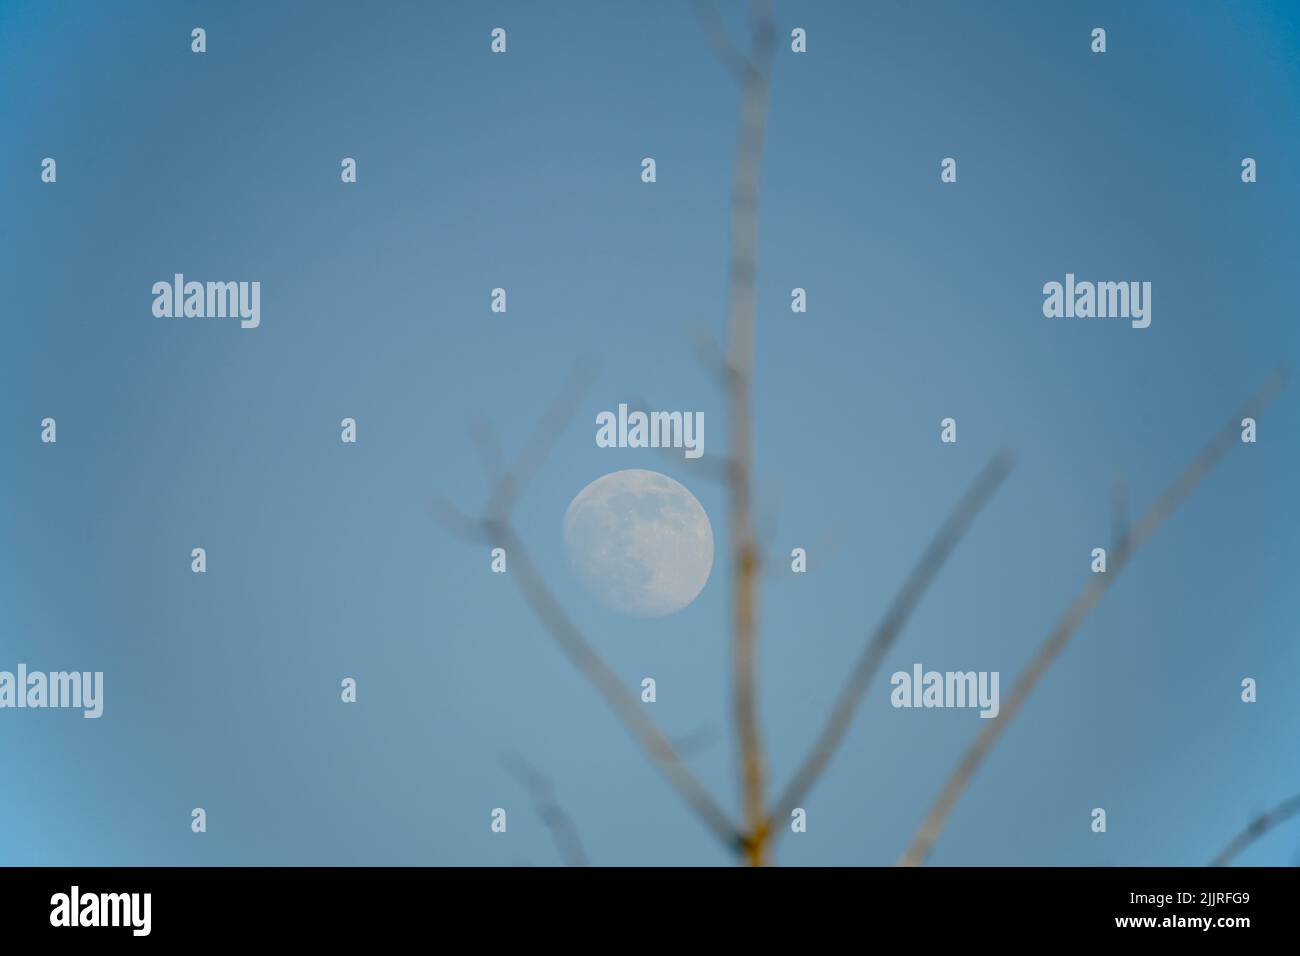 The moon in a blue sky with an unfocused branch in the foreground Stock Photo